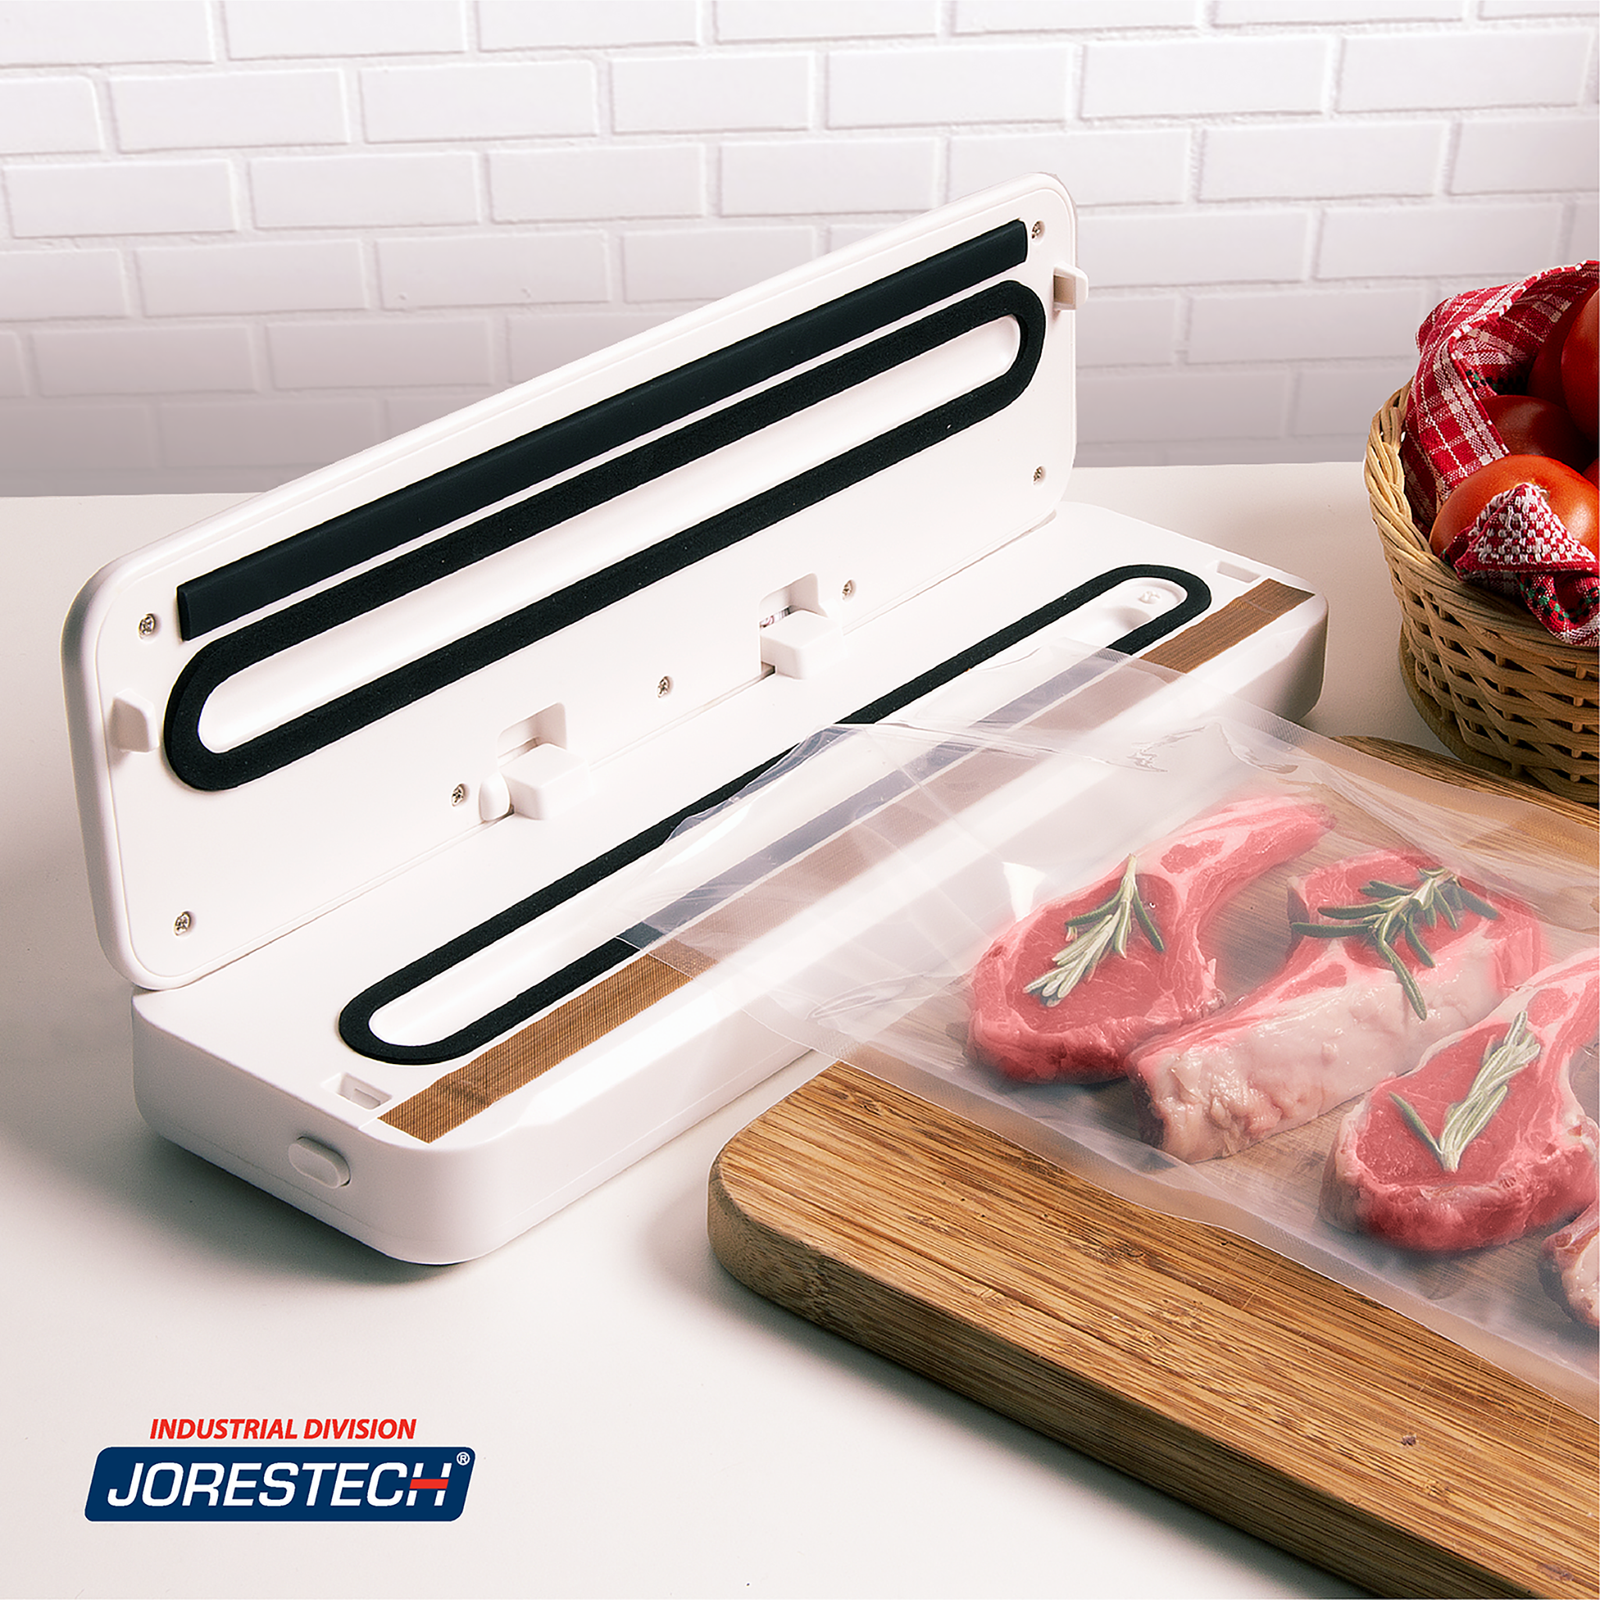 White JORES TECHNOLOGIES® vacuum sealing machine on the counter of a home kitchen. The machine is next to an open vacuum pouch full of red meat and rosemary that is placed on a wooden cutting board, ready to be sealed. 